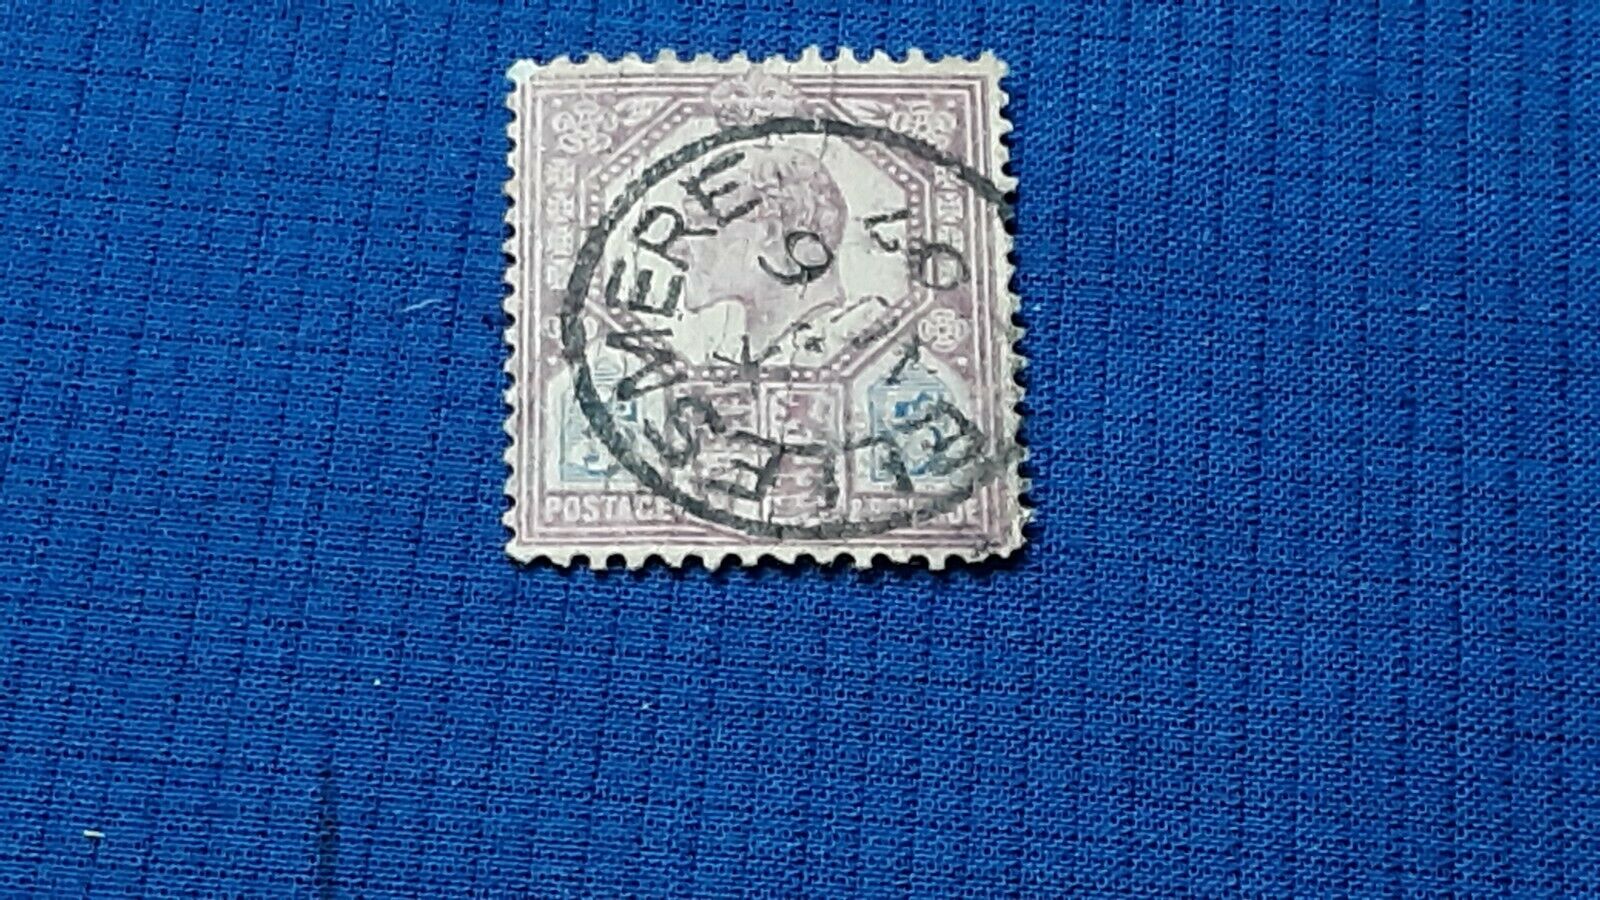 Great Britain Stamp Sc# 134 Used Issued 1902 Cv $ 22.50